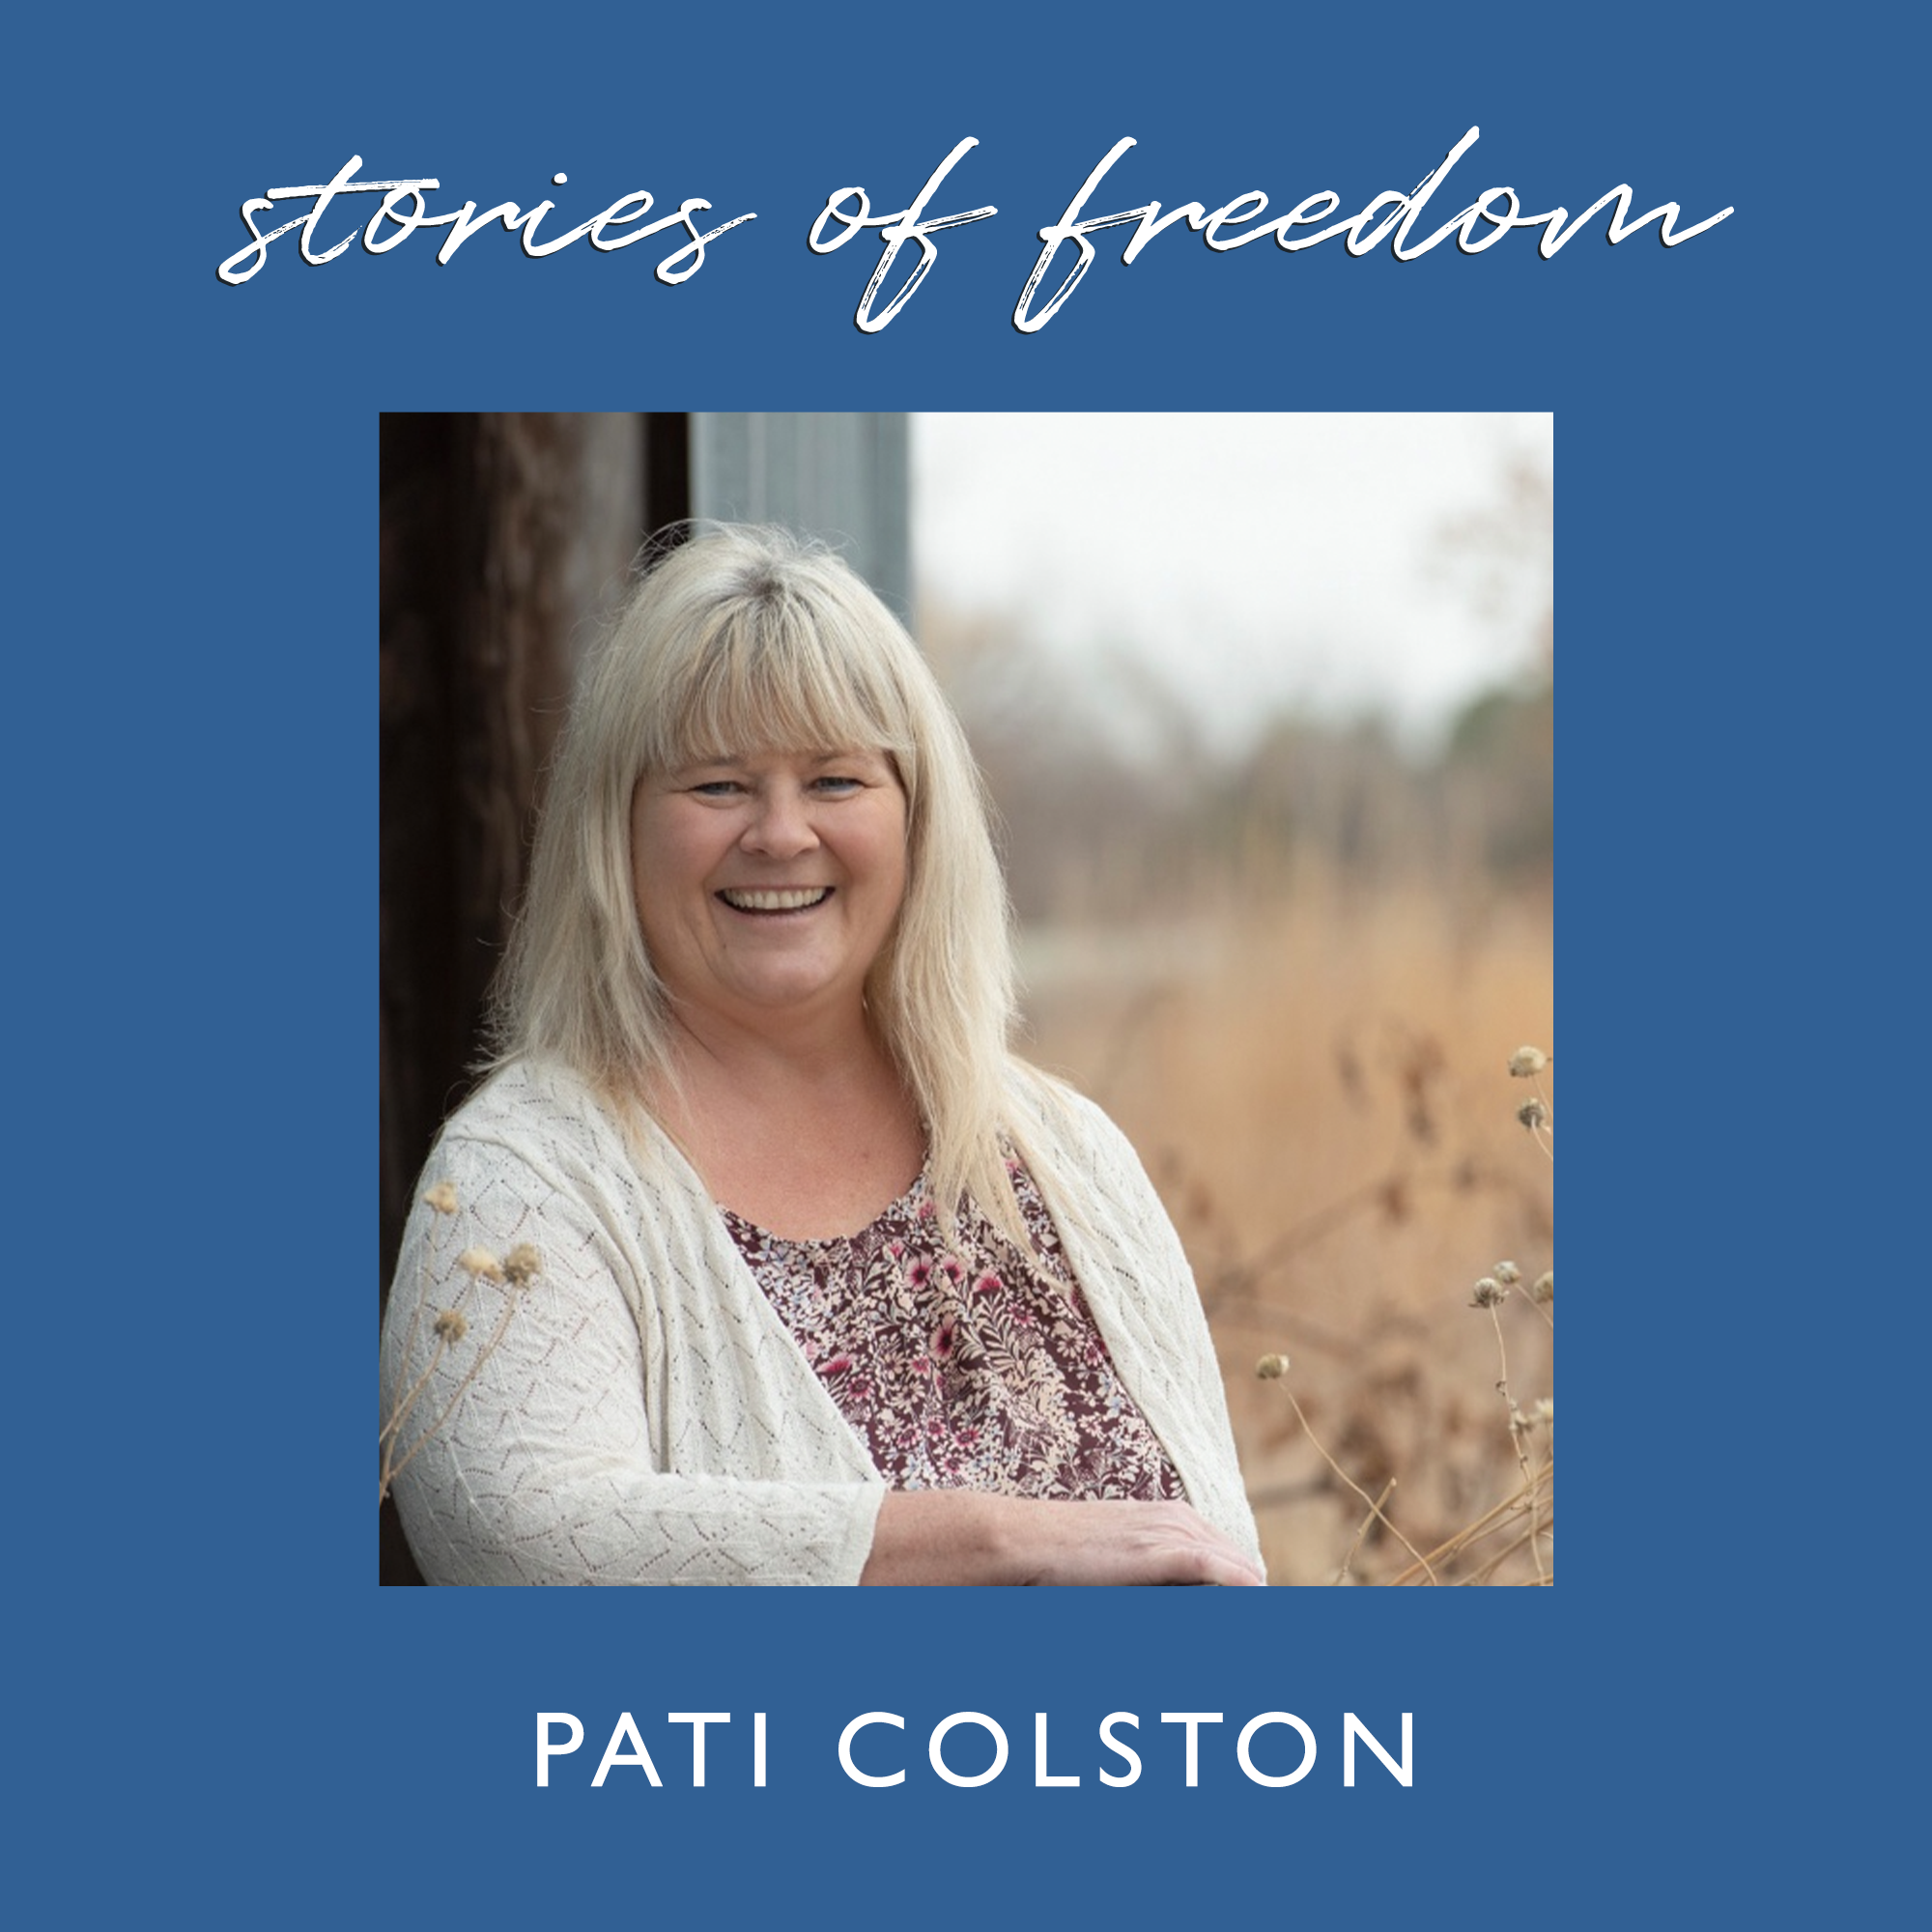 Pati Colston: A Women’s Story of Healing from Fear, Shame and Childhood Wounds